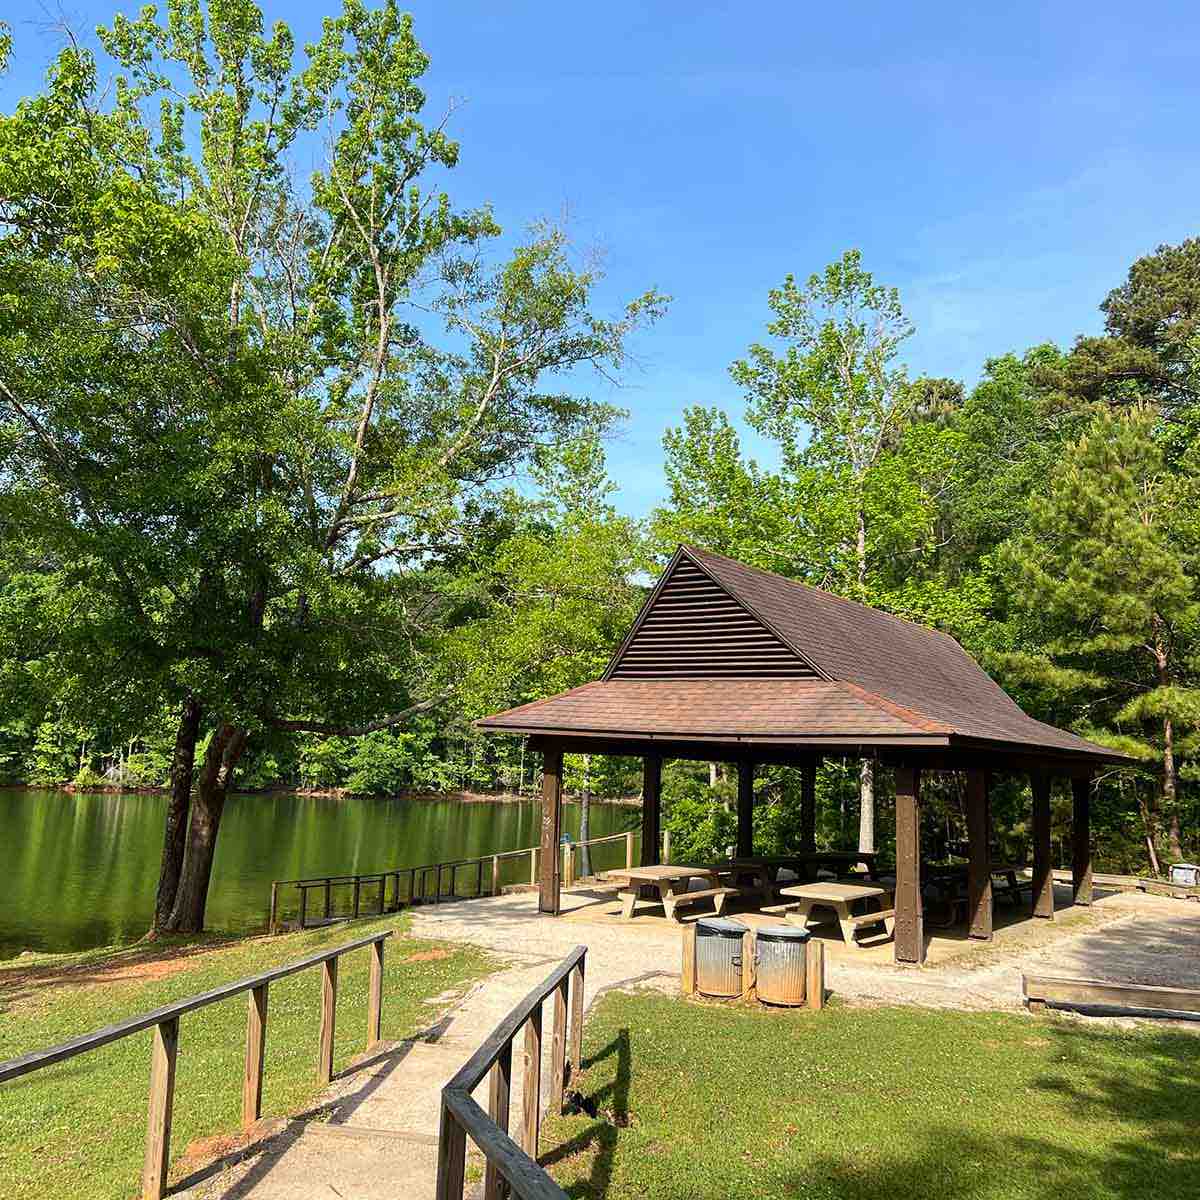 A pavilion for picnicking at Horace King Park on West Point Lake.